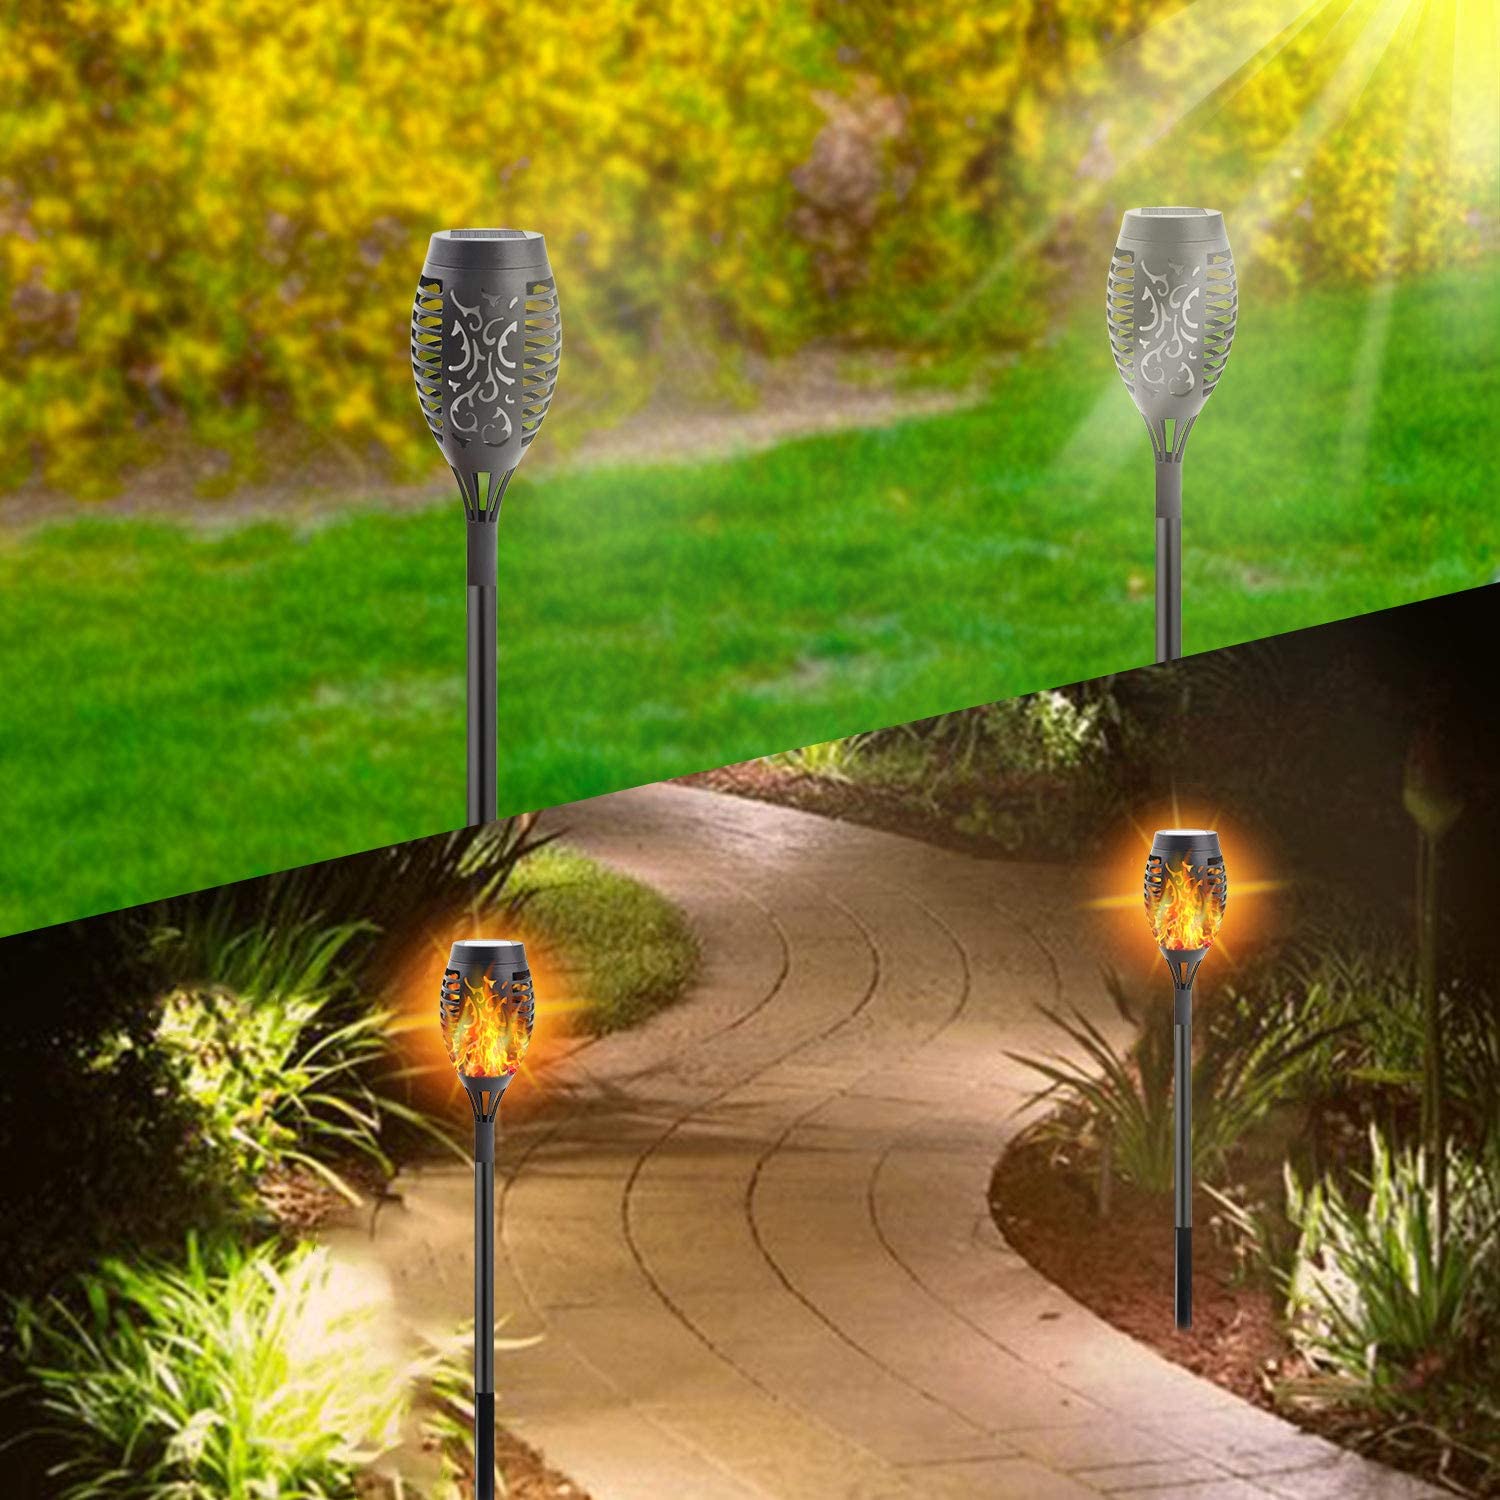 KAQ 4PK 20In Solar Lights Outdoor, Upgraded Solar Torch Light with Flickering Flame, Dusk to Dawn Auto On/Off Waterproof Landscape Lighting for Patio Pathway Garden Yard Decorations